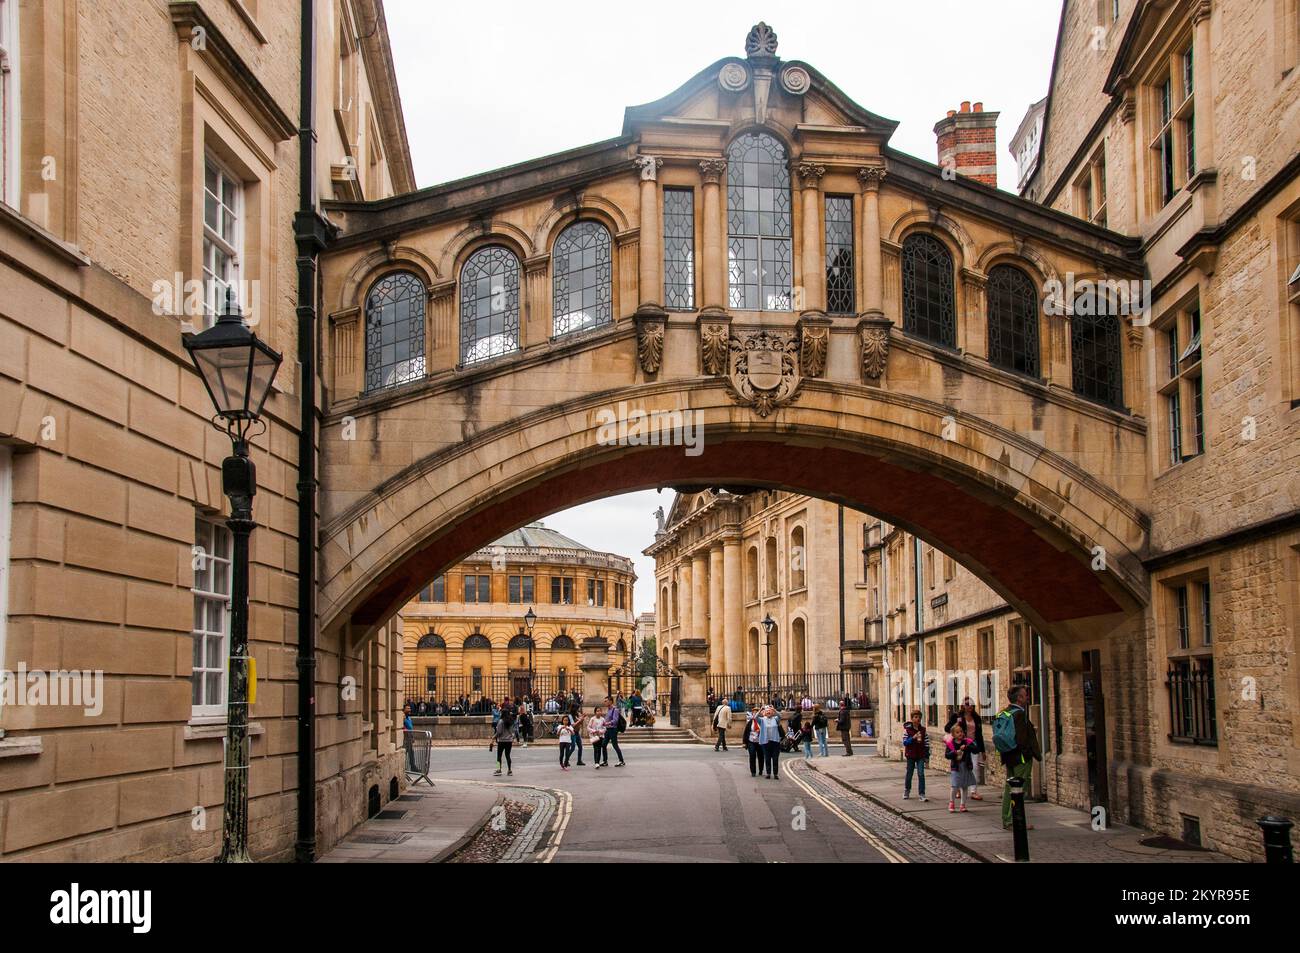 The Hertford Bridge commonly known as The Bridge of Sighs links the Old and New quads in Herford College and spans New College Lane. Stock Photo